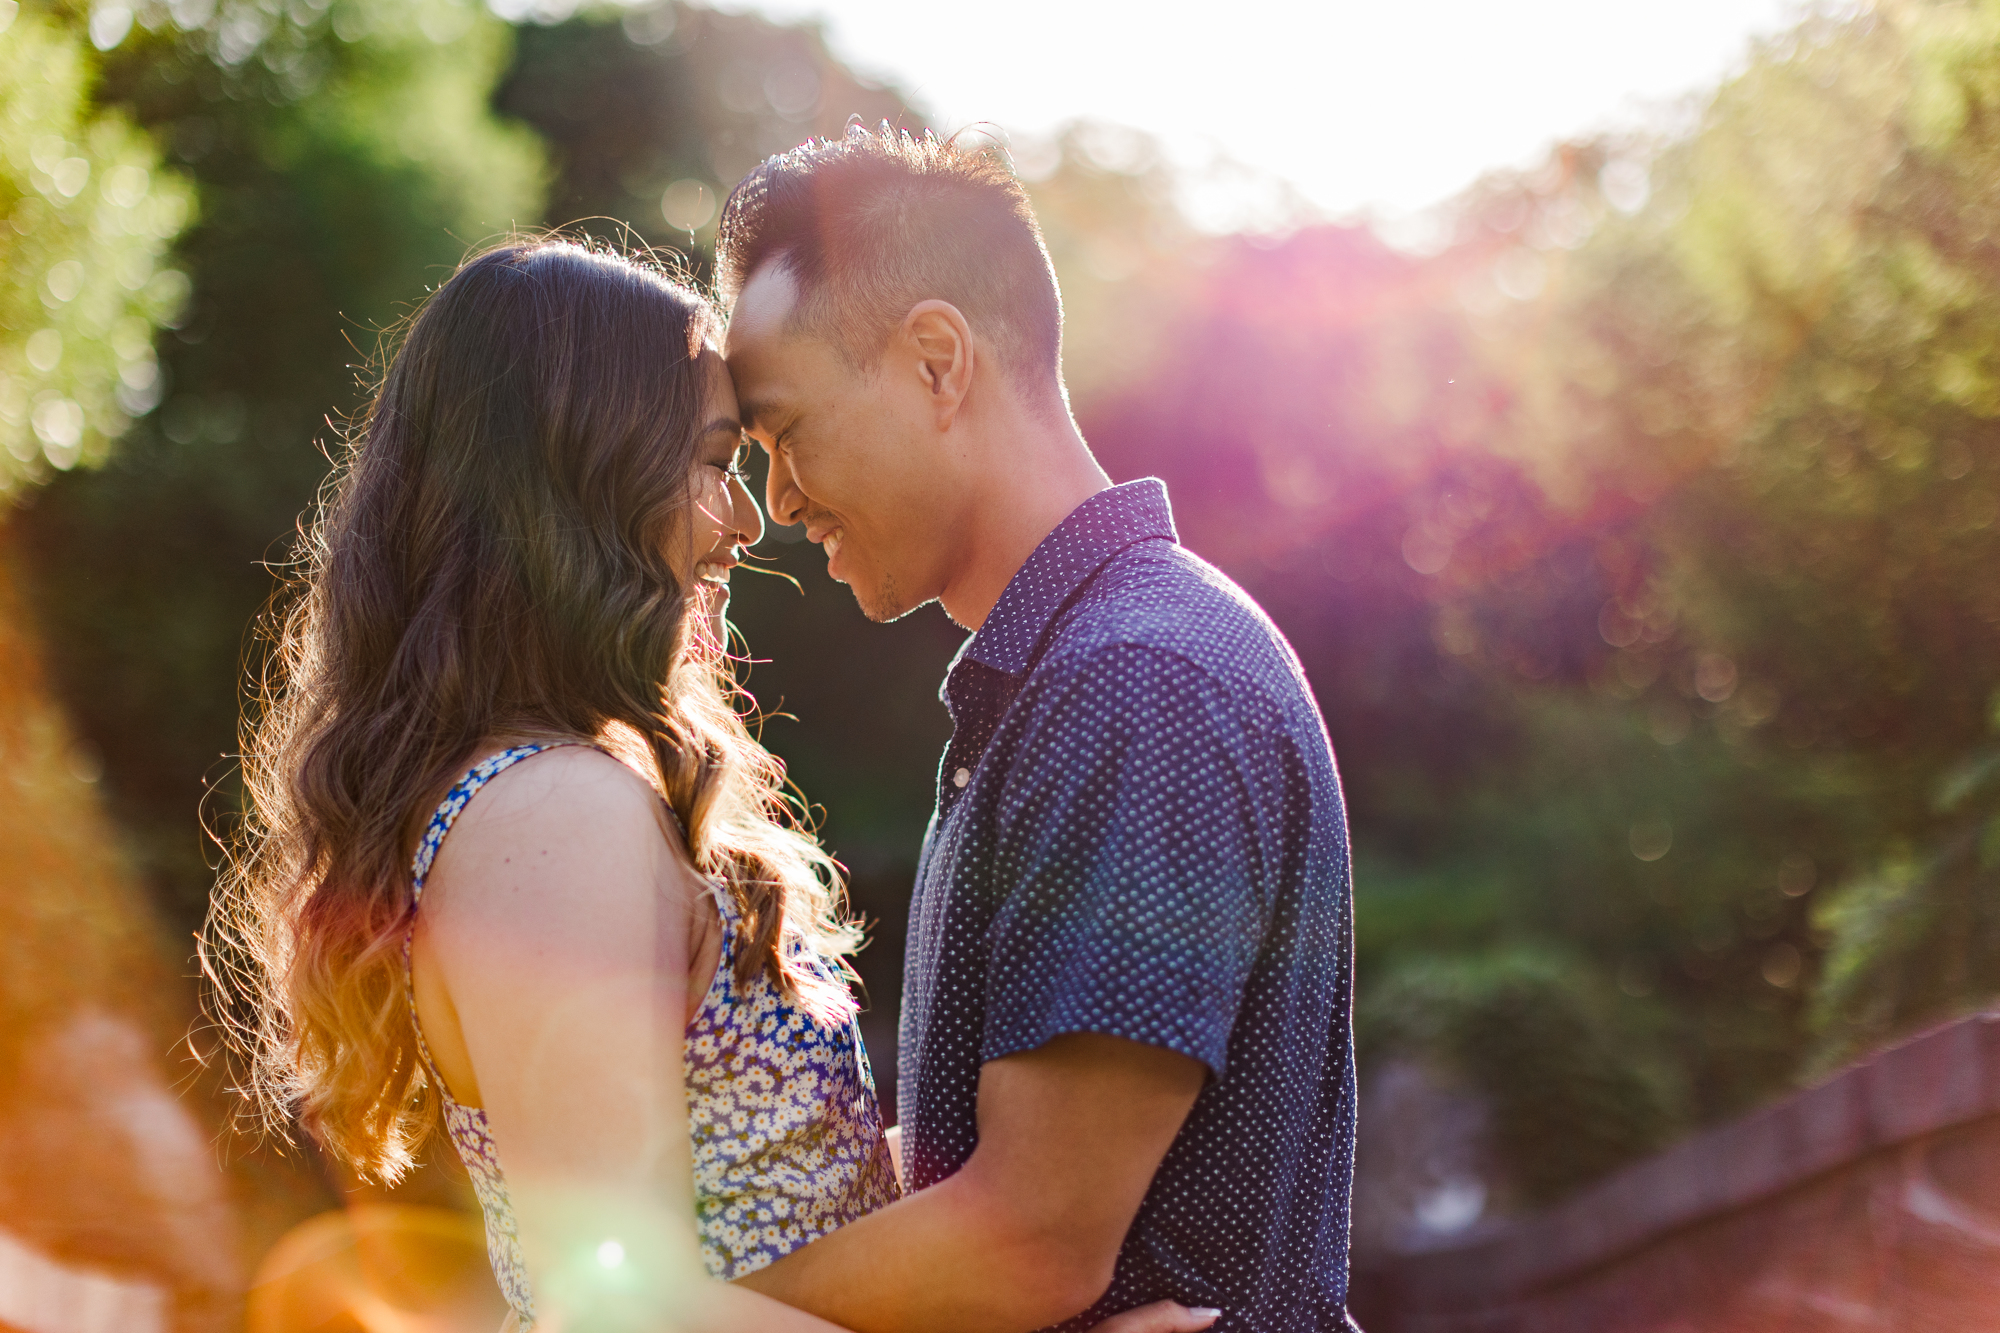 Breath - Taking Engagement Photos in Central Park, New York